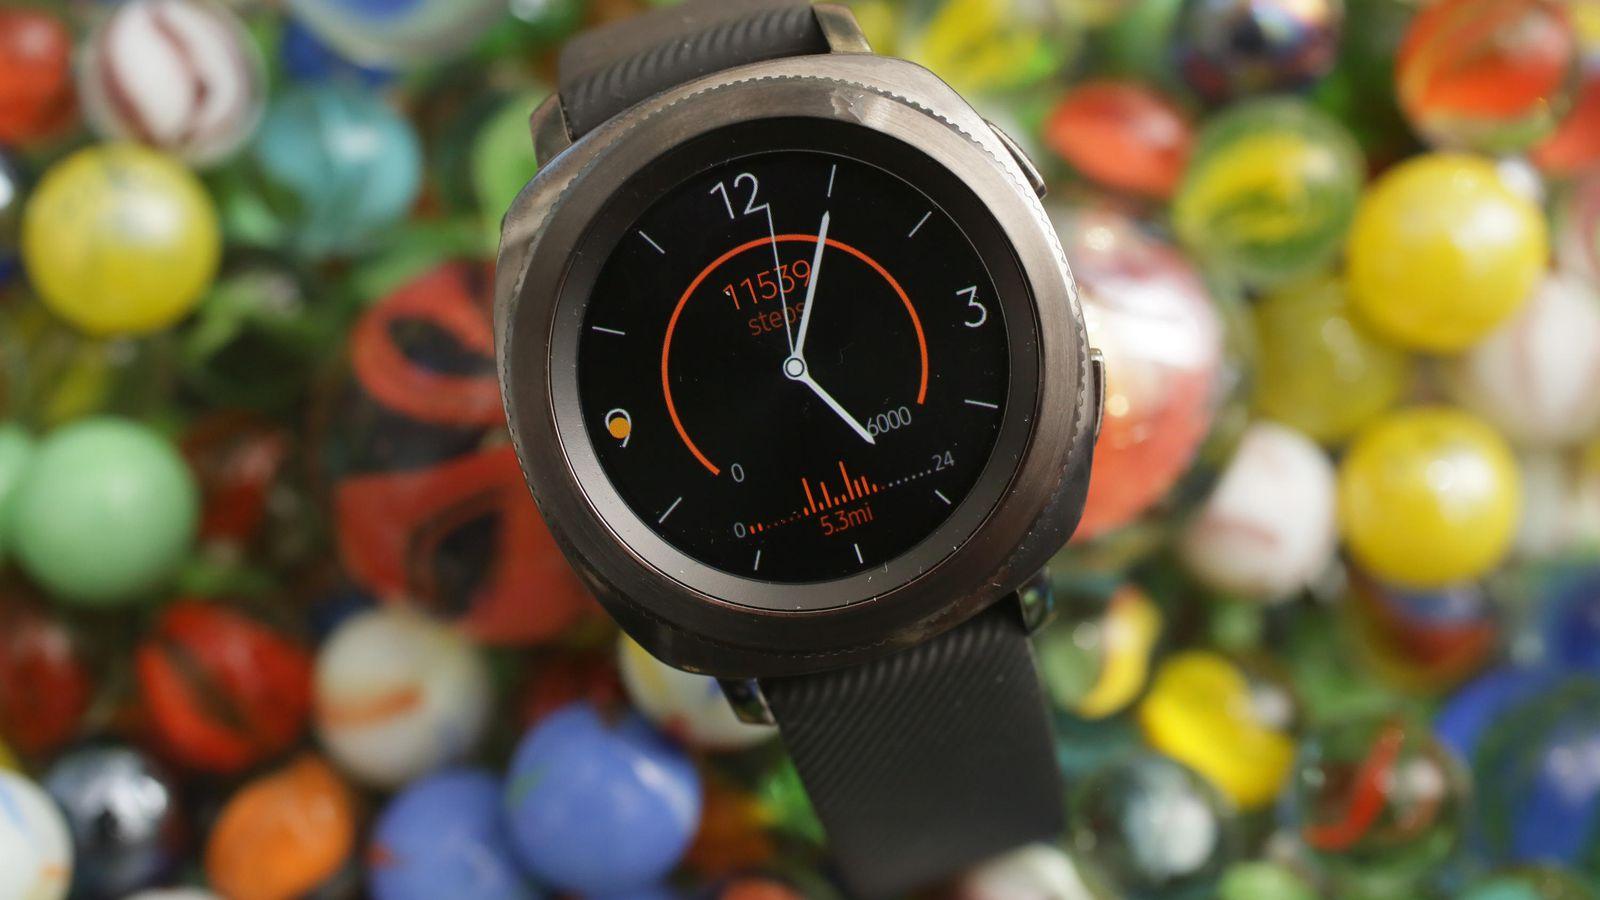 Samsung Galaxy Watch: Rumored specs, price and release date